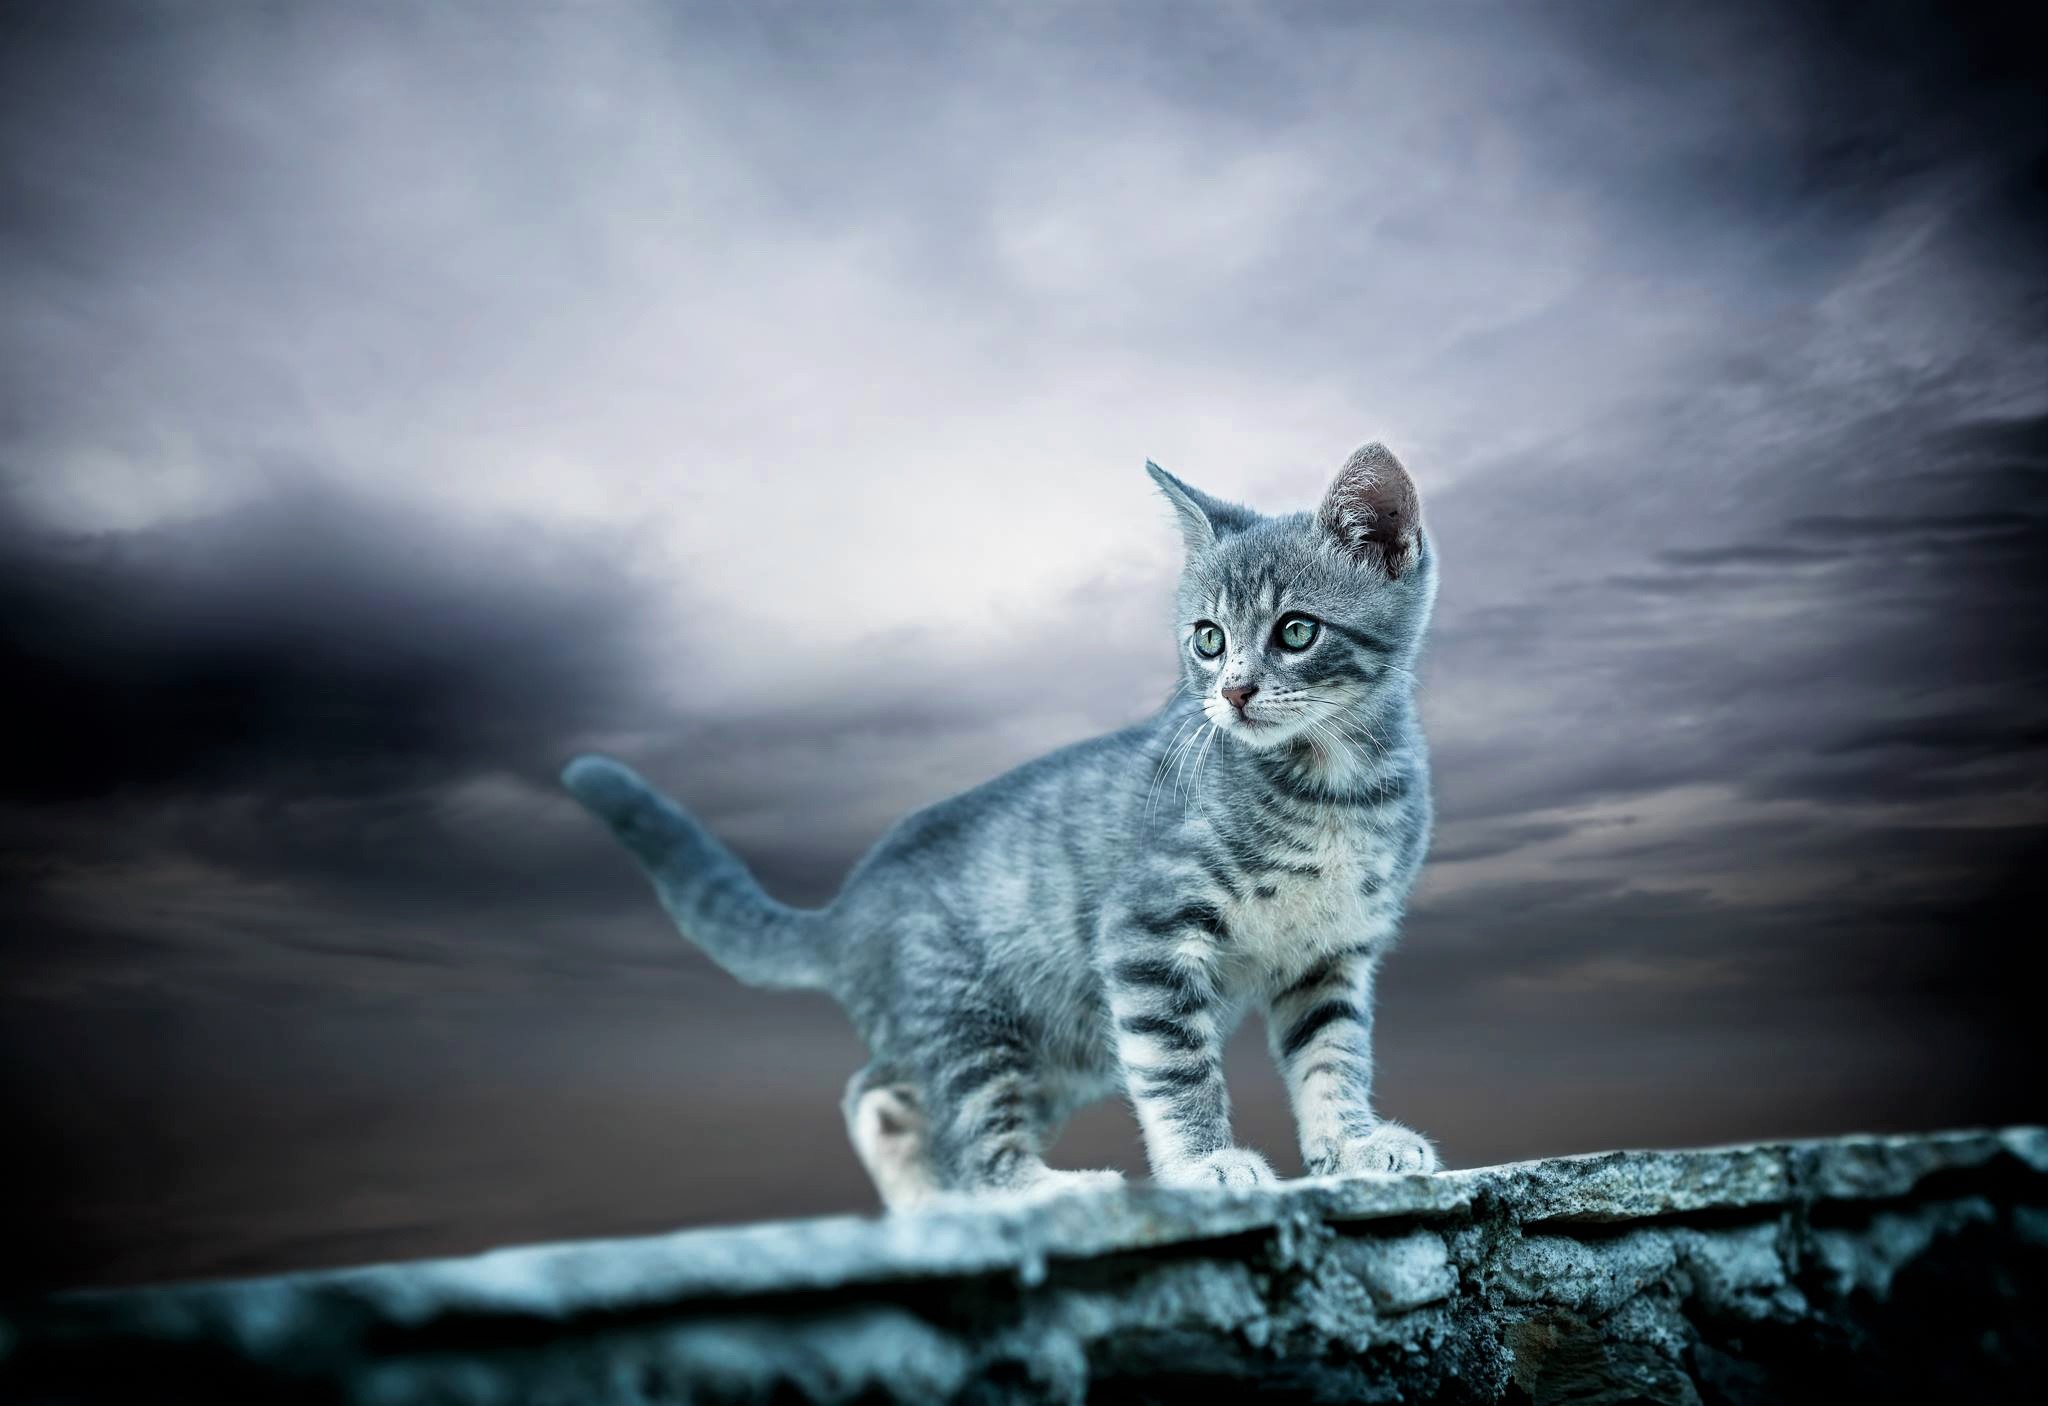 Download mobile wallpaper Cats, Cat, Kitten, Animal, Cute, Baby Animal for free.